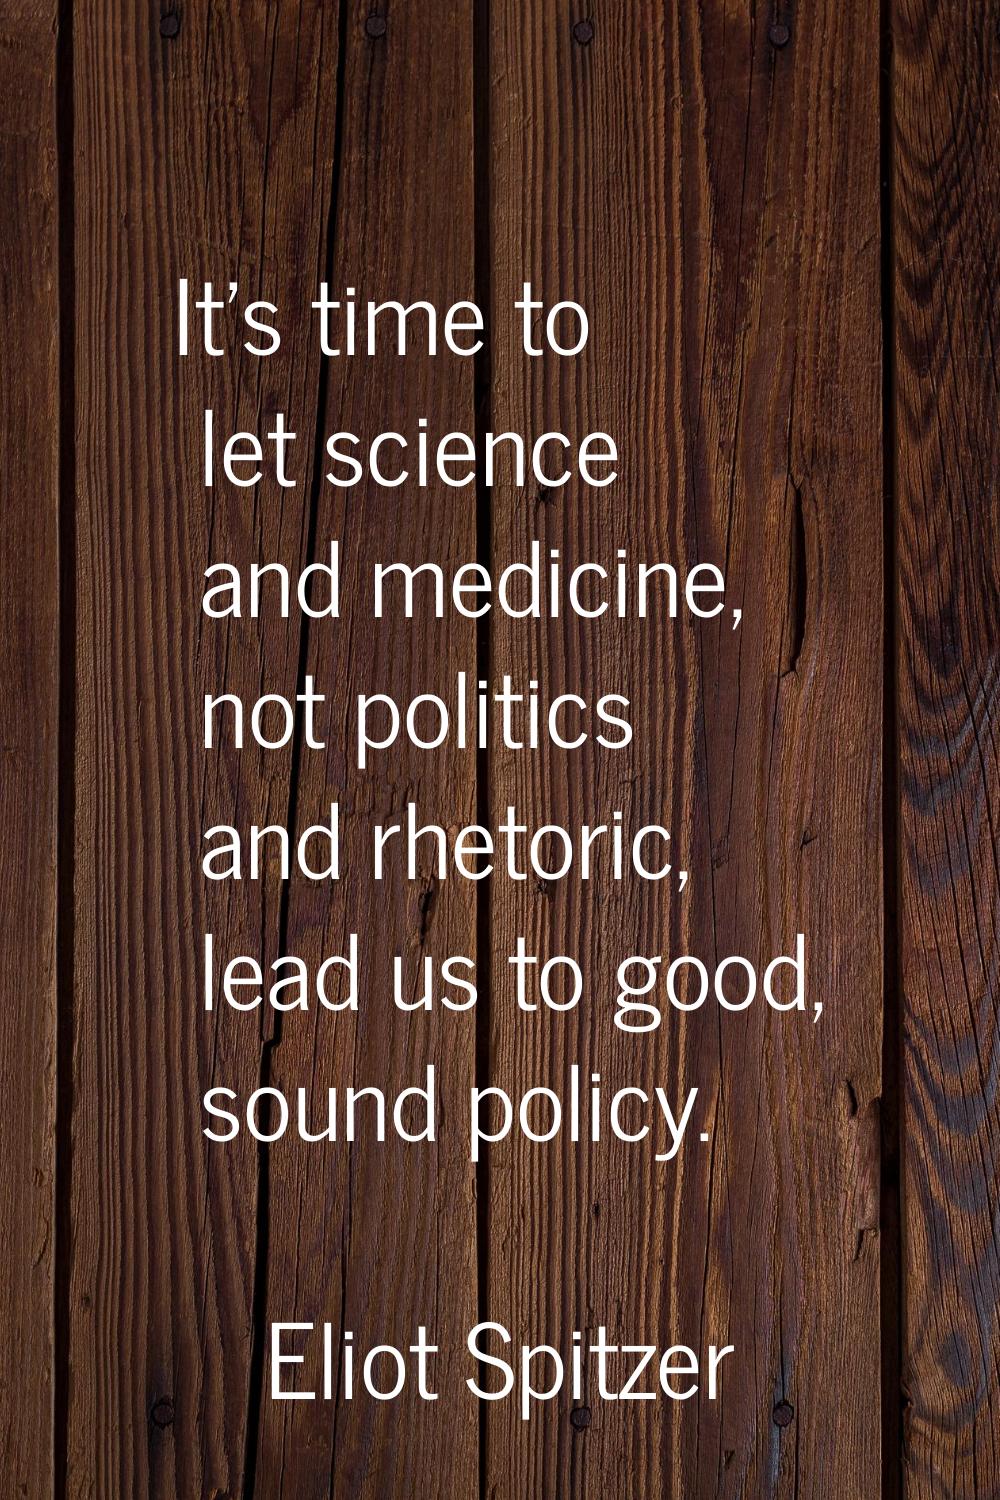 It's time to let science and medicine, not politics and rhetoric, lead us to good, sound policy.